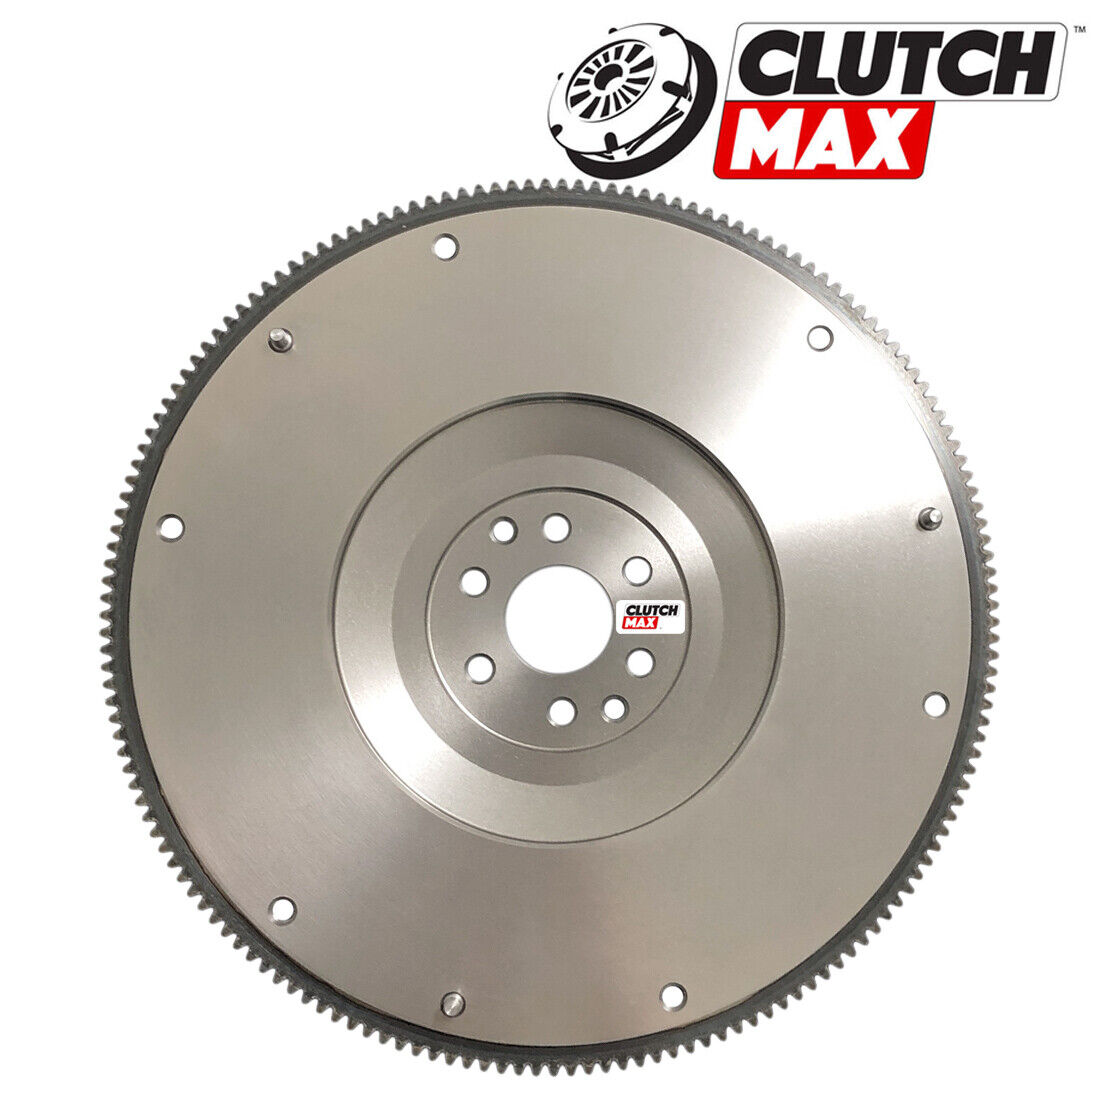 FRPP REPLACEMENT PERFORMANCE CLUTCH FLYWHEEL for 6-BOLT FORD MUSTANG 4.6L 281ci